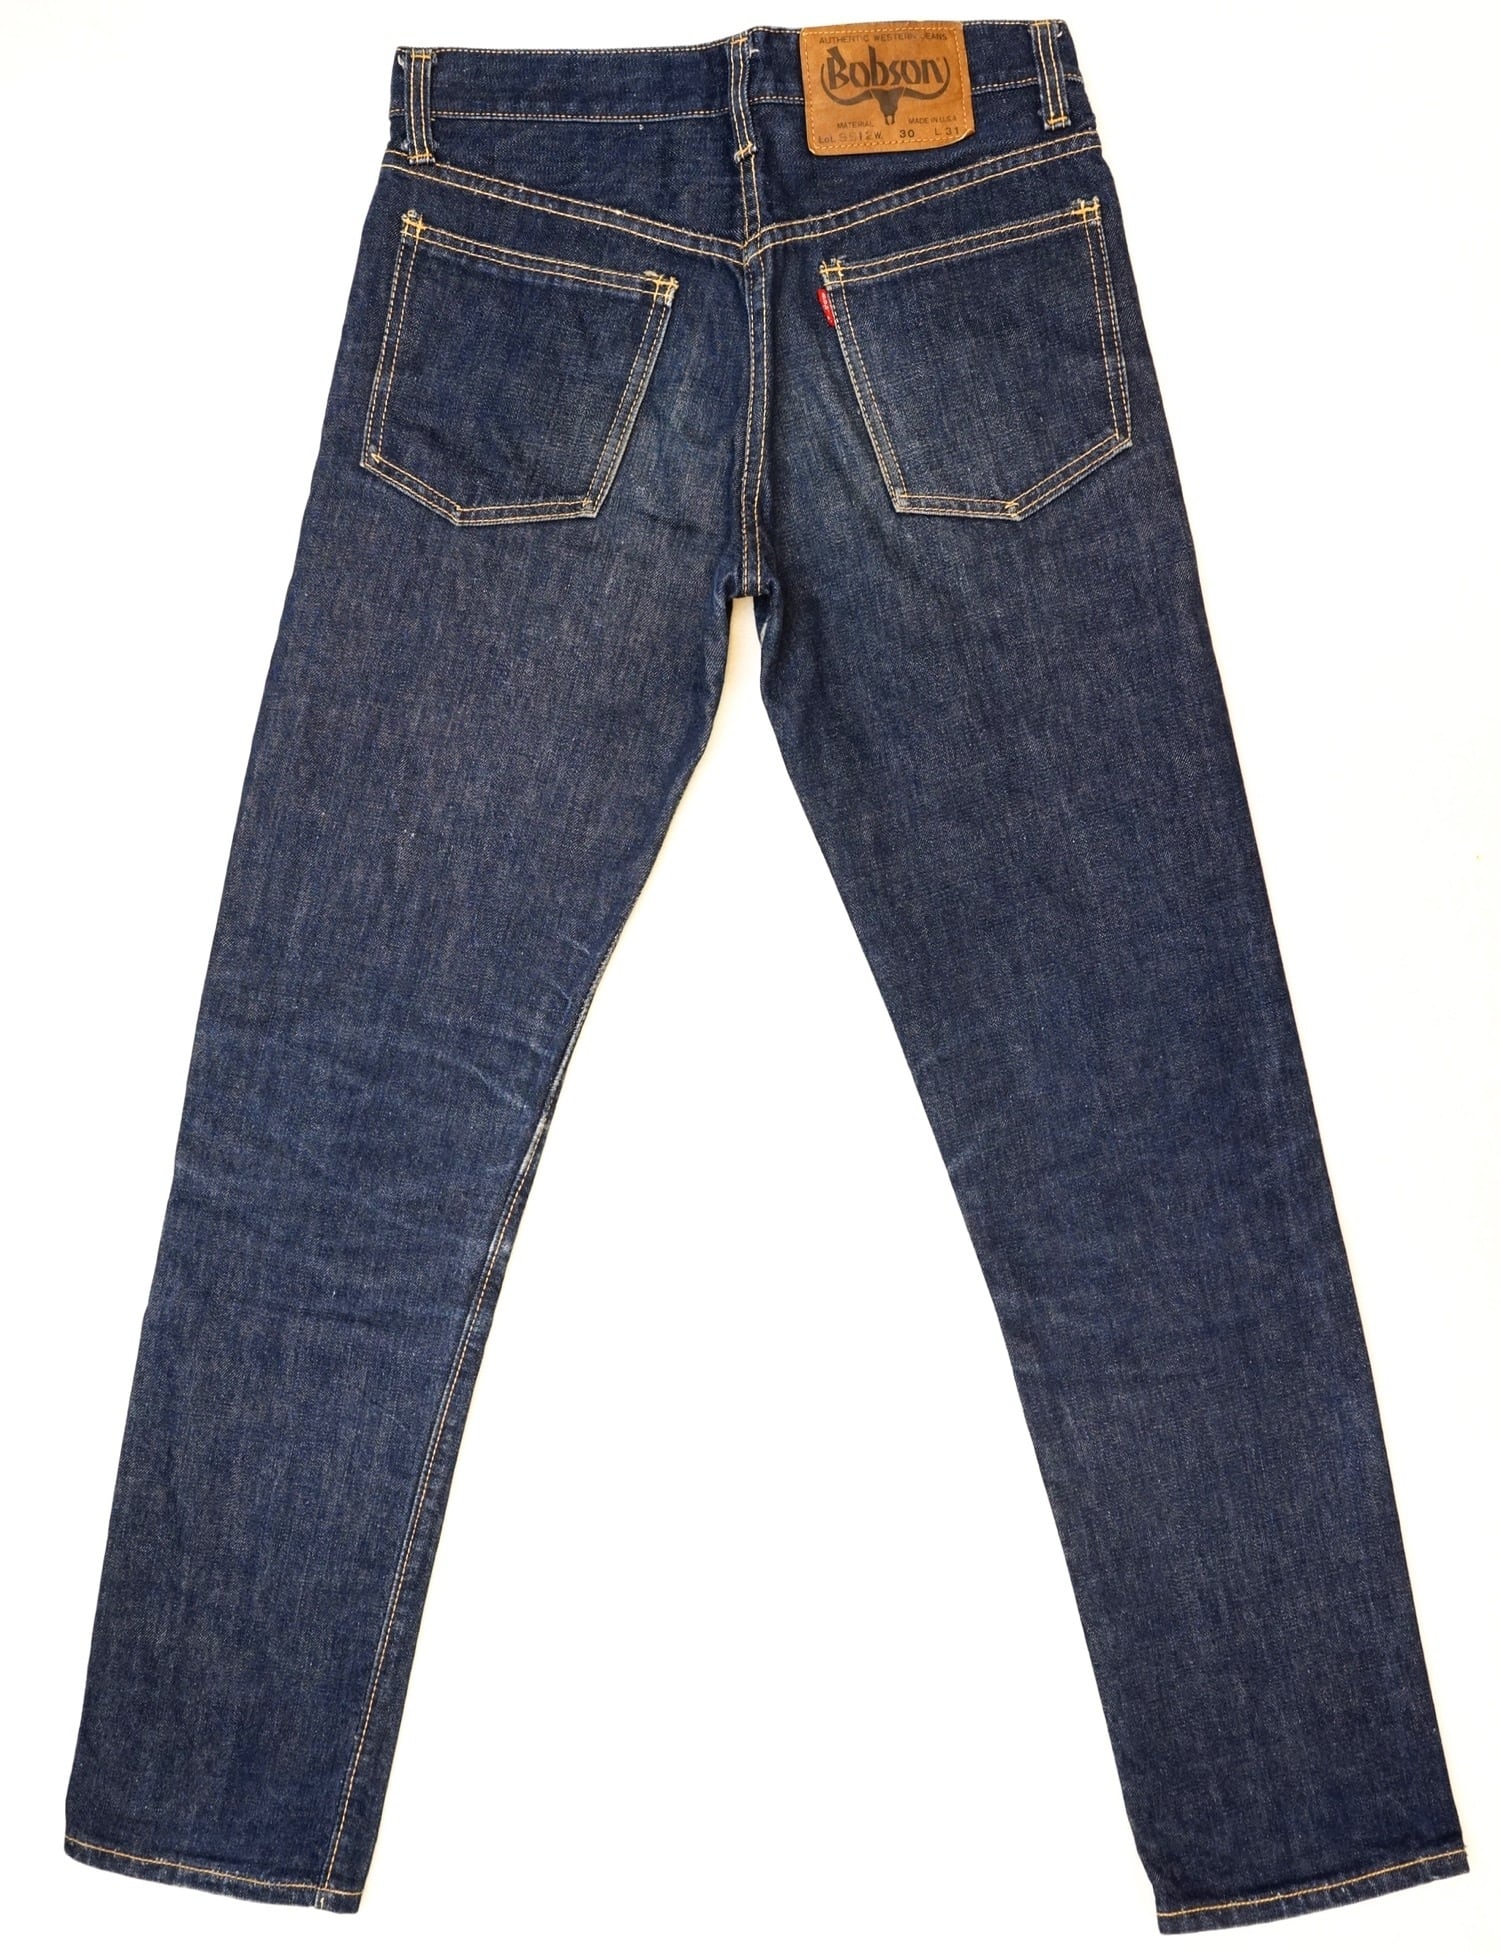 130 BOBSON SS12 JEANS ボブソン ジーンズ ジーパン テーパード 昭和レトロ ヴィンテージ 古着 メンズ MADE IN USA  | ANTIQUE JOHN アンティーク ジョン powered by BASE